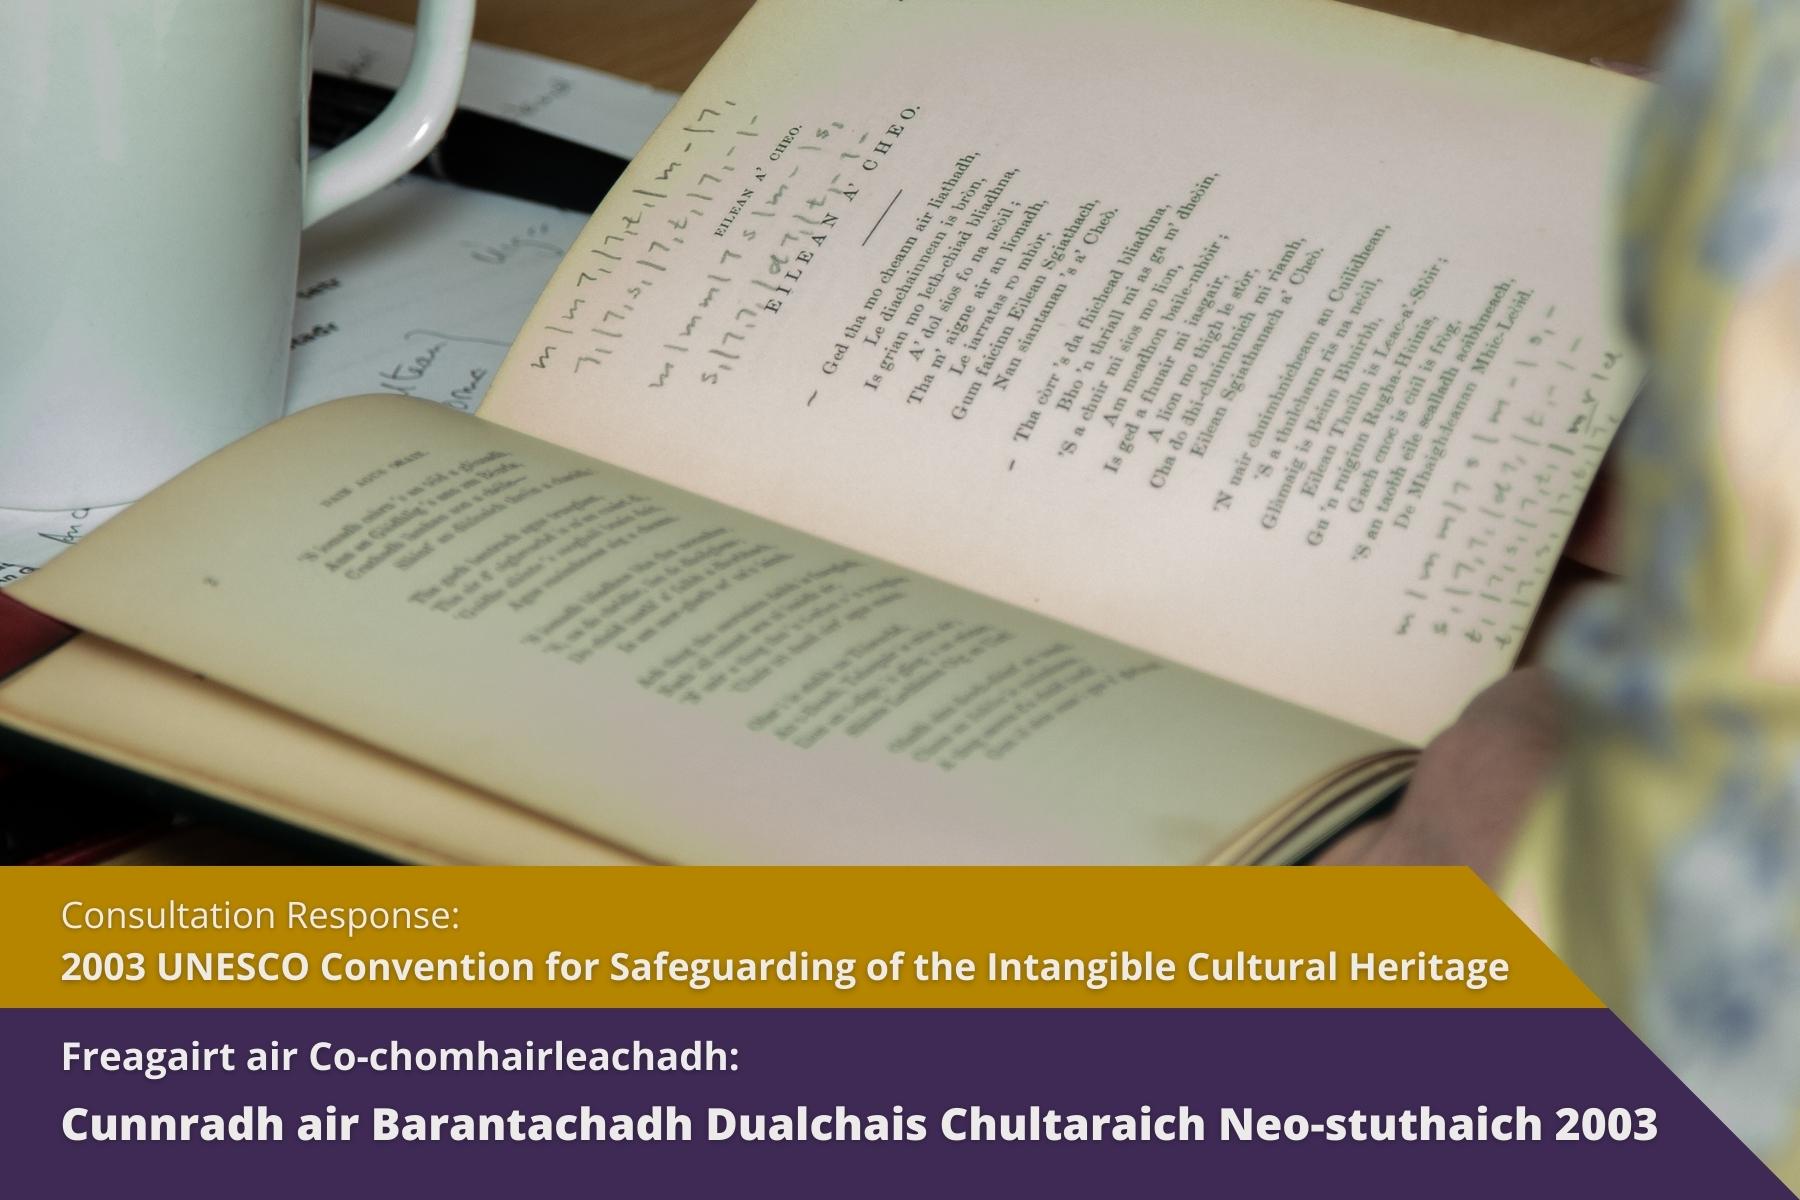 Picture: Old book open on page with lyrics to song 'Eilean a' Cheo' with text over picture. Texts reads 'Consultation Response: 2003 UNESCO Convention for Safeguarding of the Intangible Cultural Heritage'